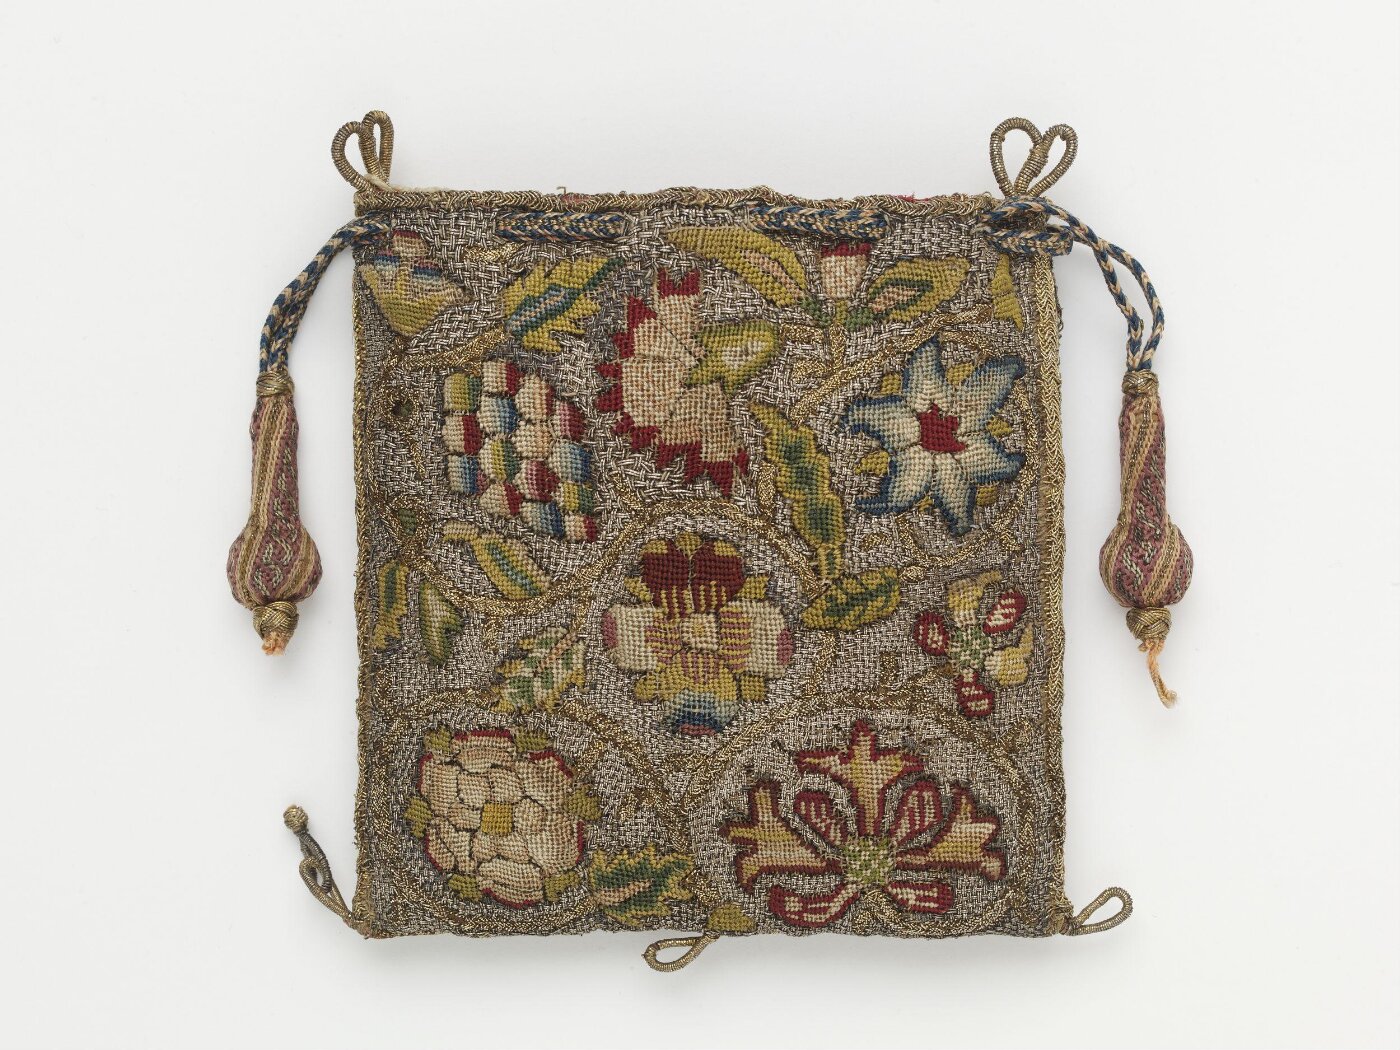 A photo of an old over-the-shoulder woven bag, with a flower and vetegable design